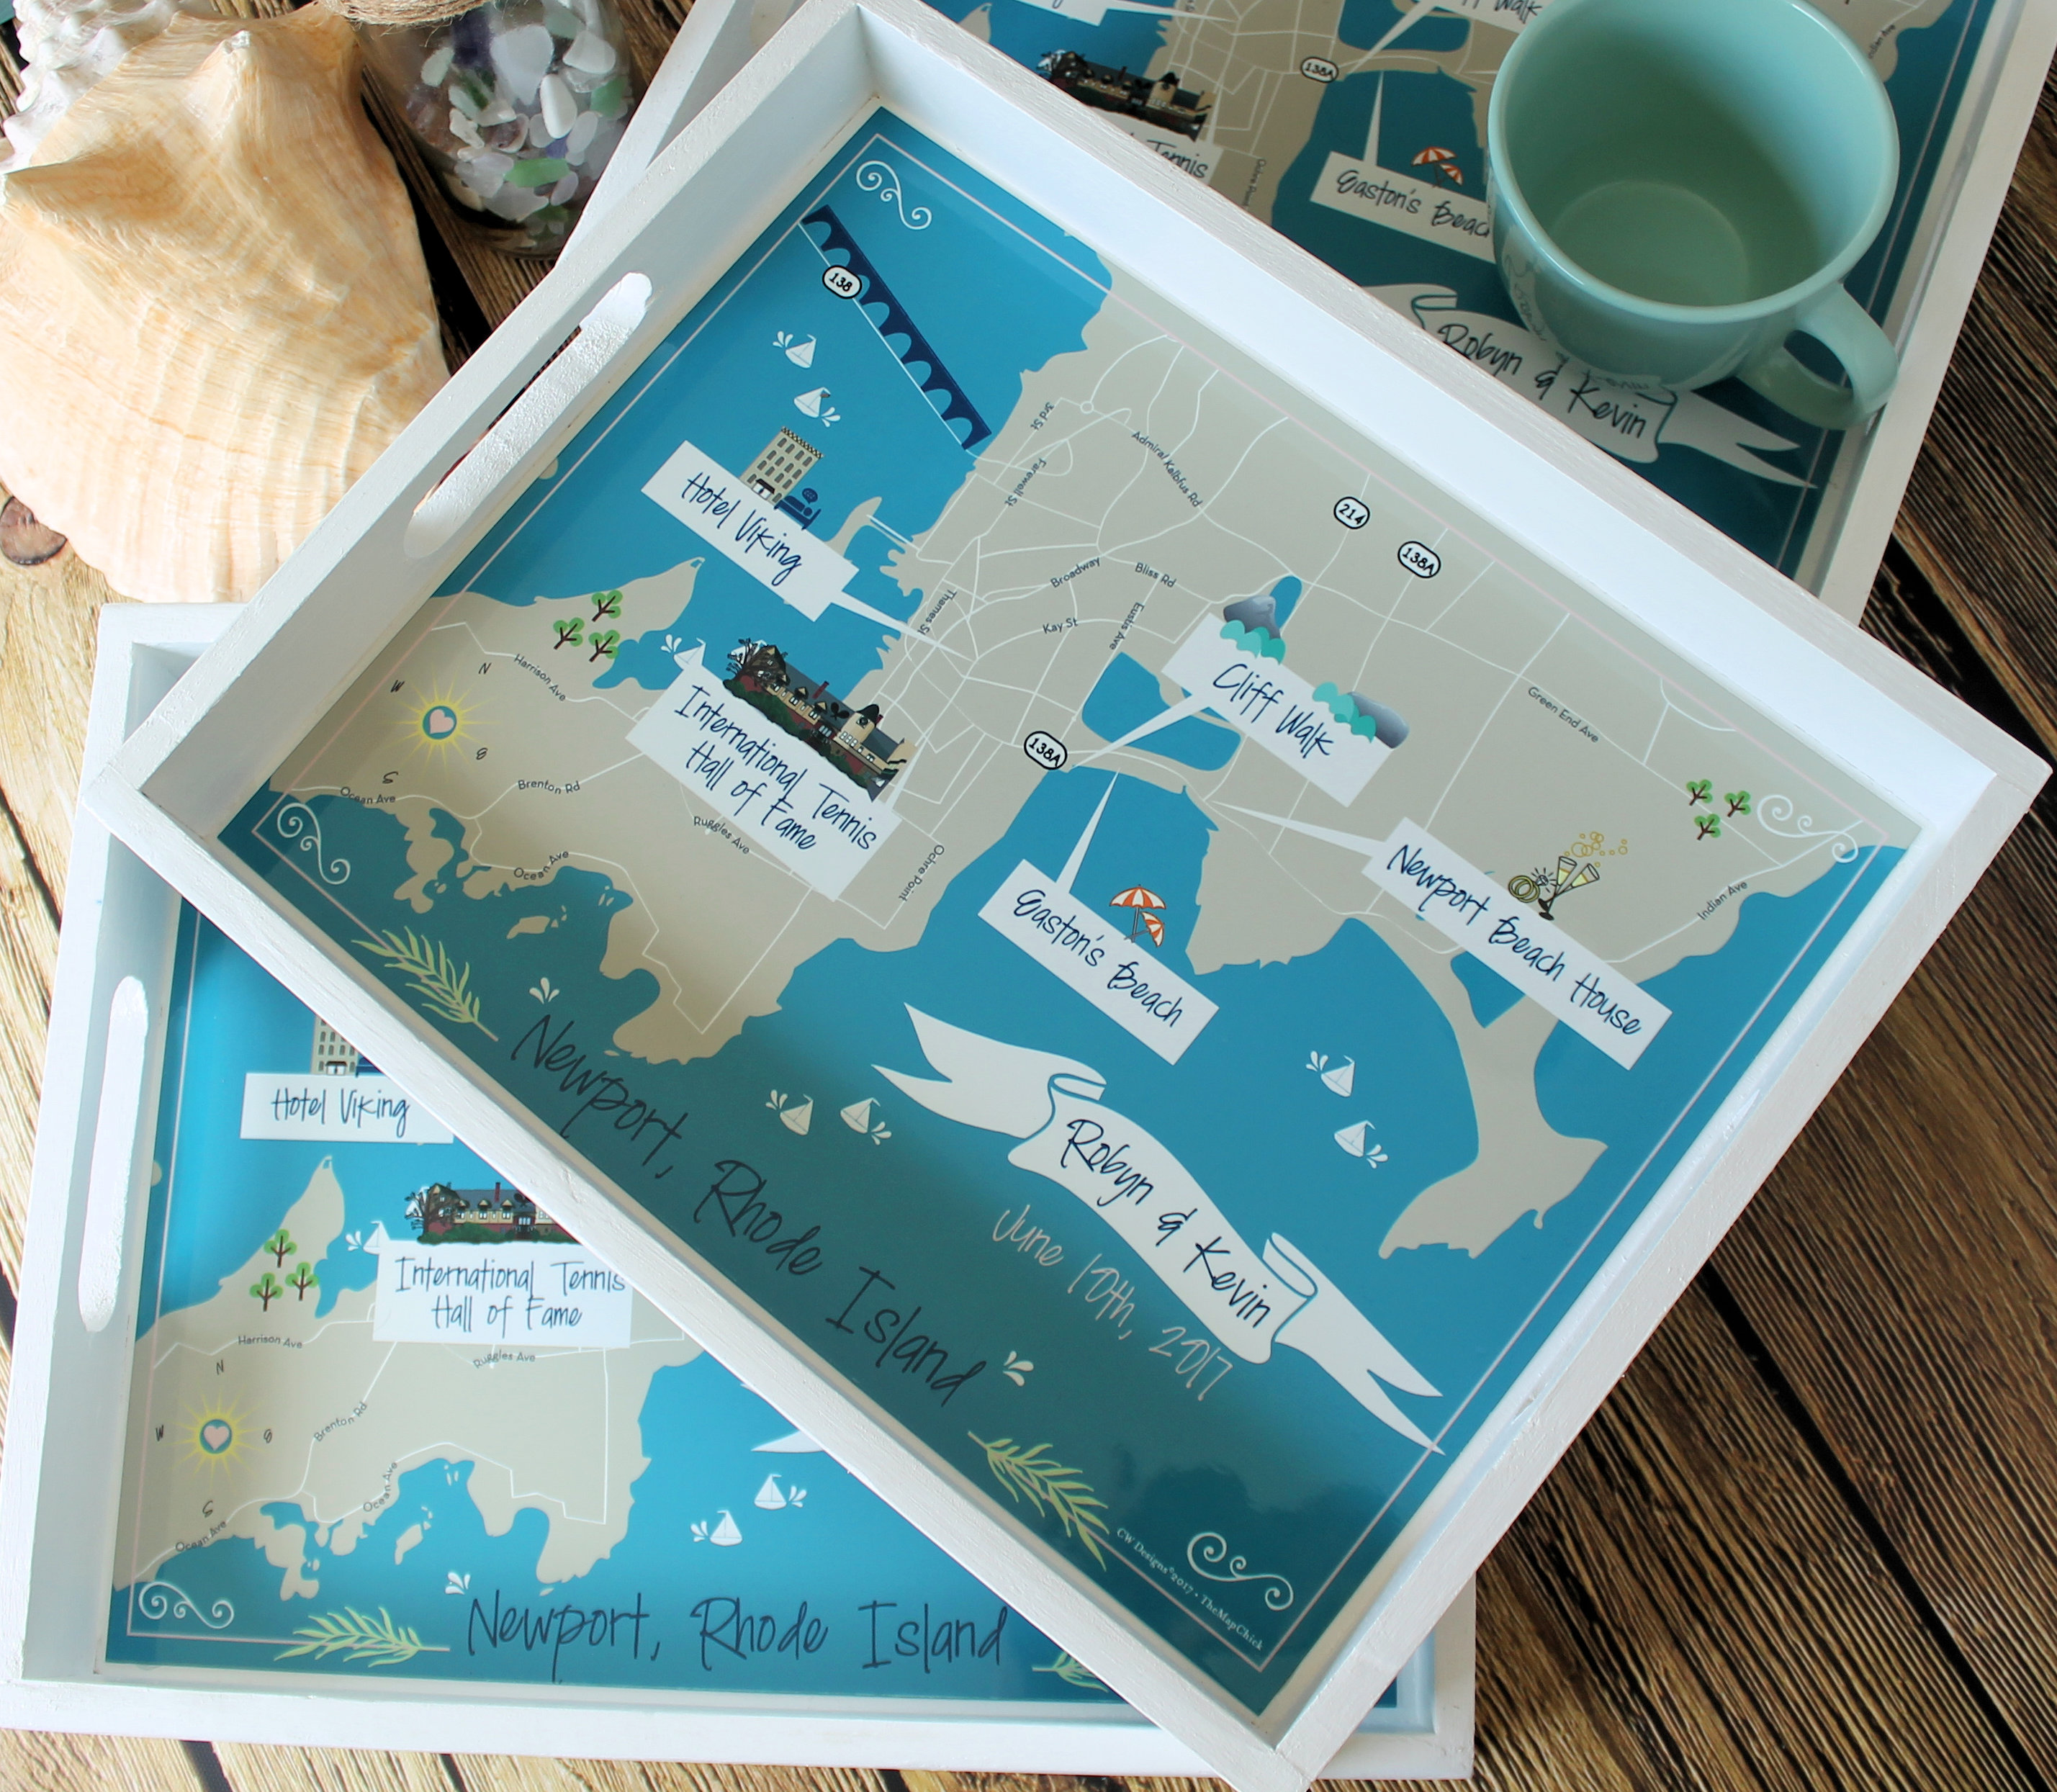 Wedding Map Serving Tray for Special Occasion Contest made with sublimation printing